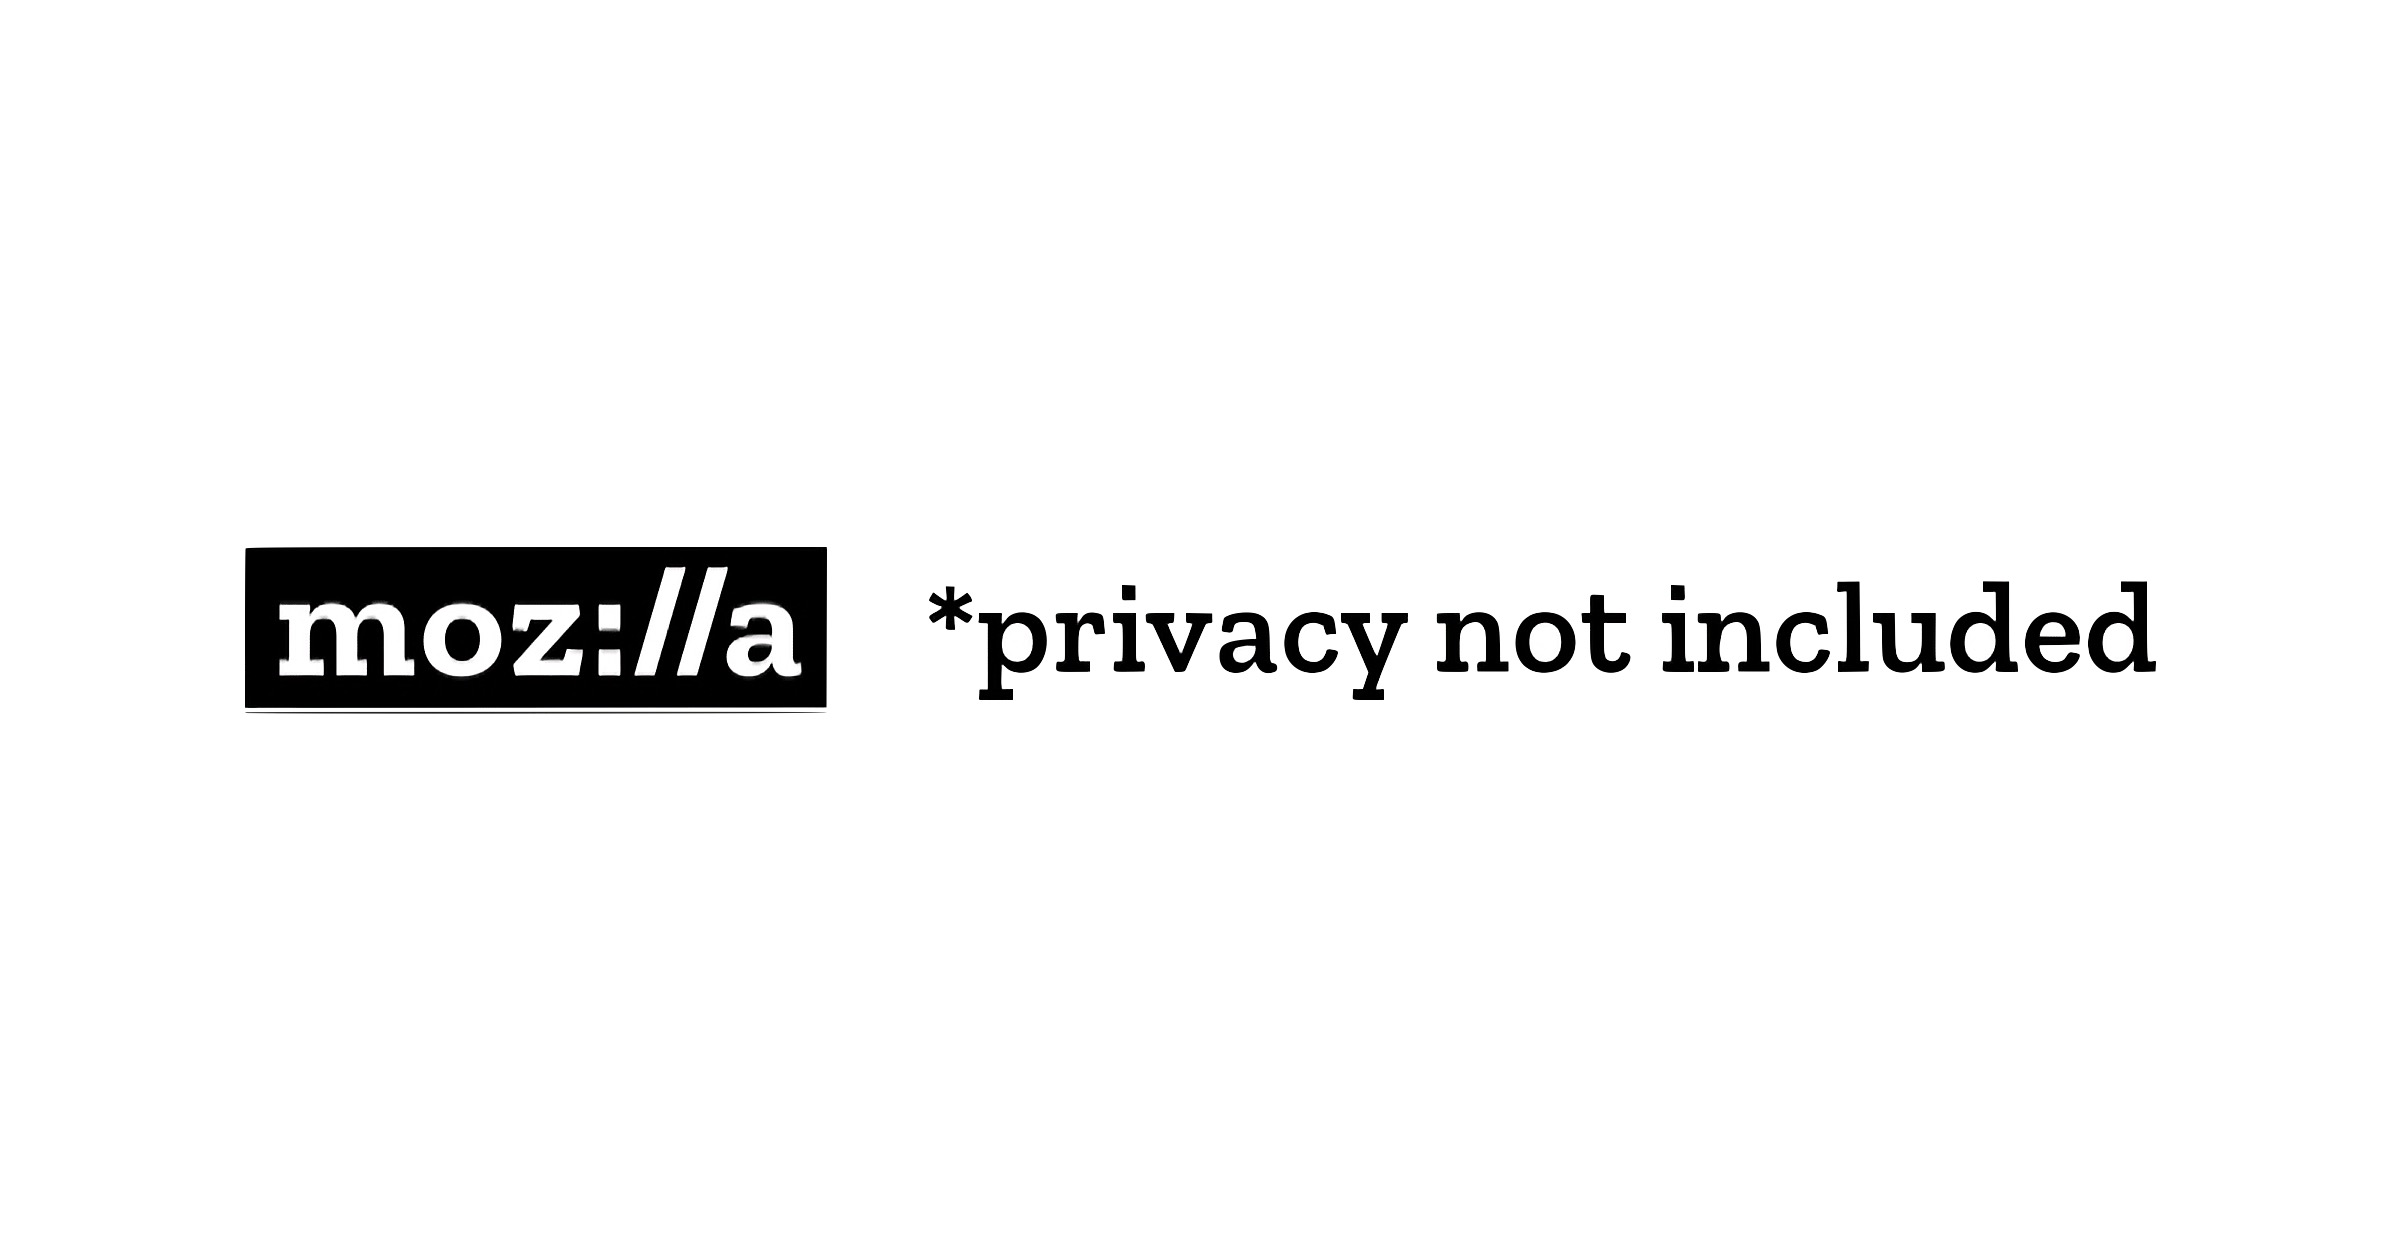 Mozilla Adds Sex Toys, Dating Apps to its ‘Privacy Not Included’ List